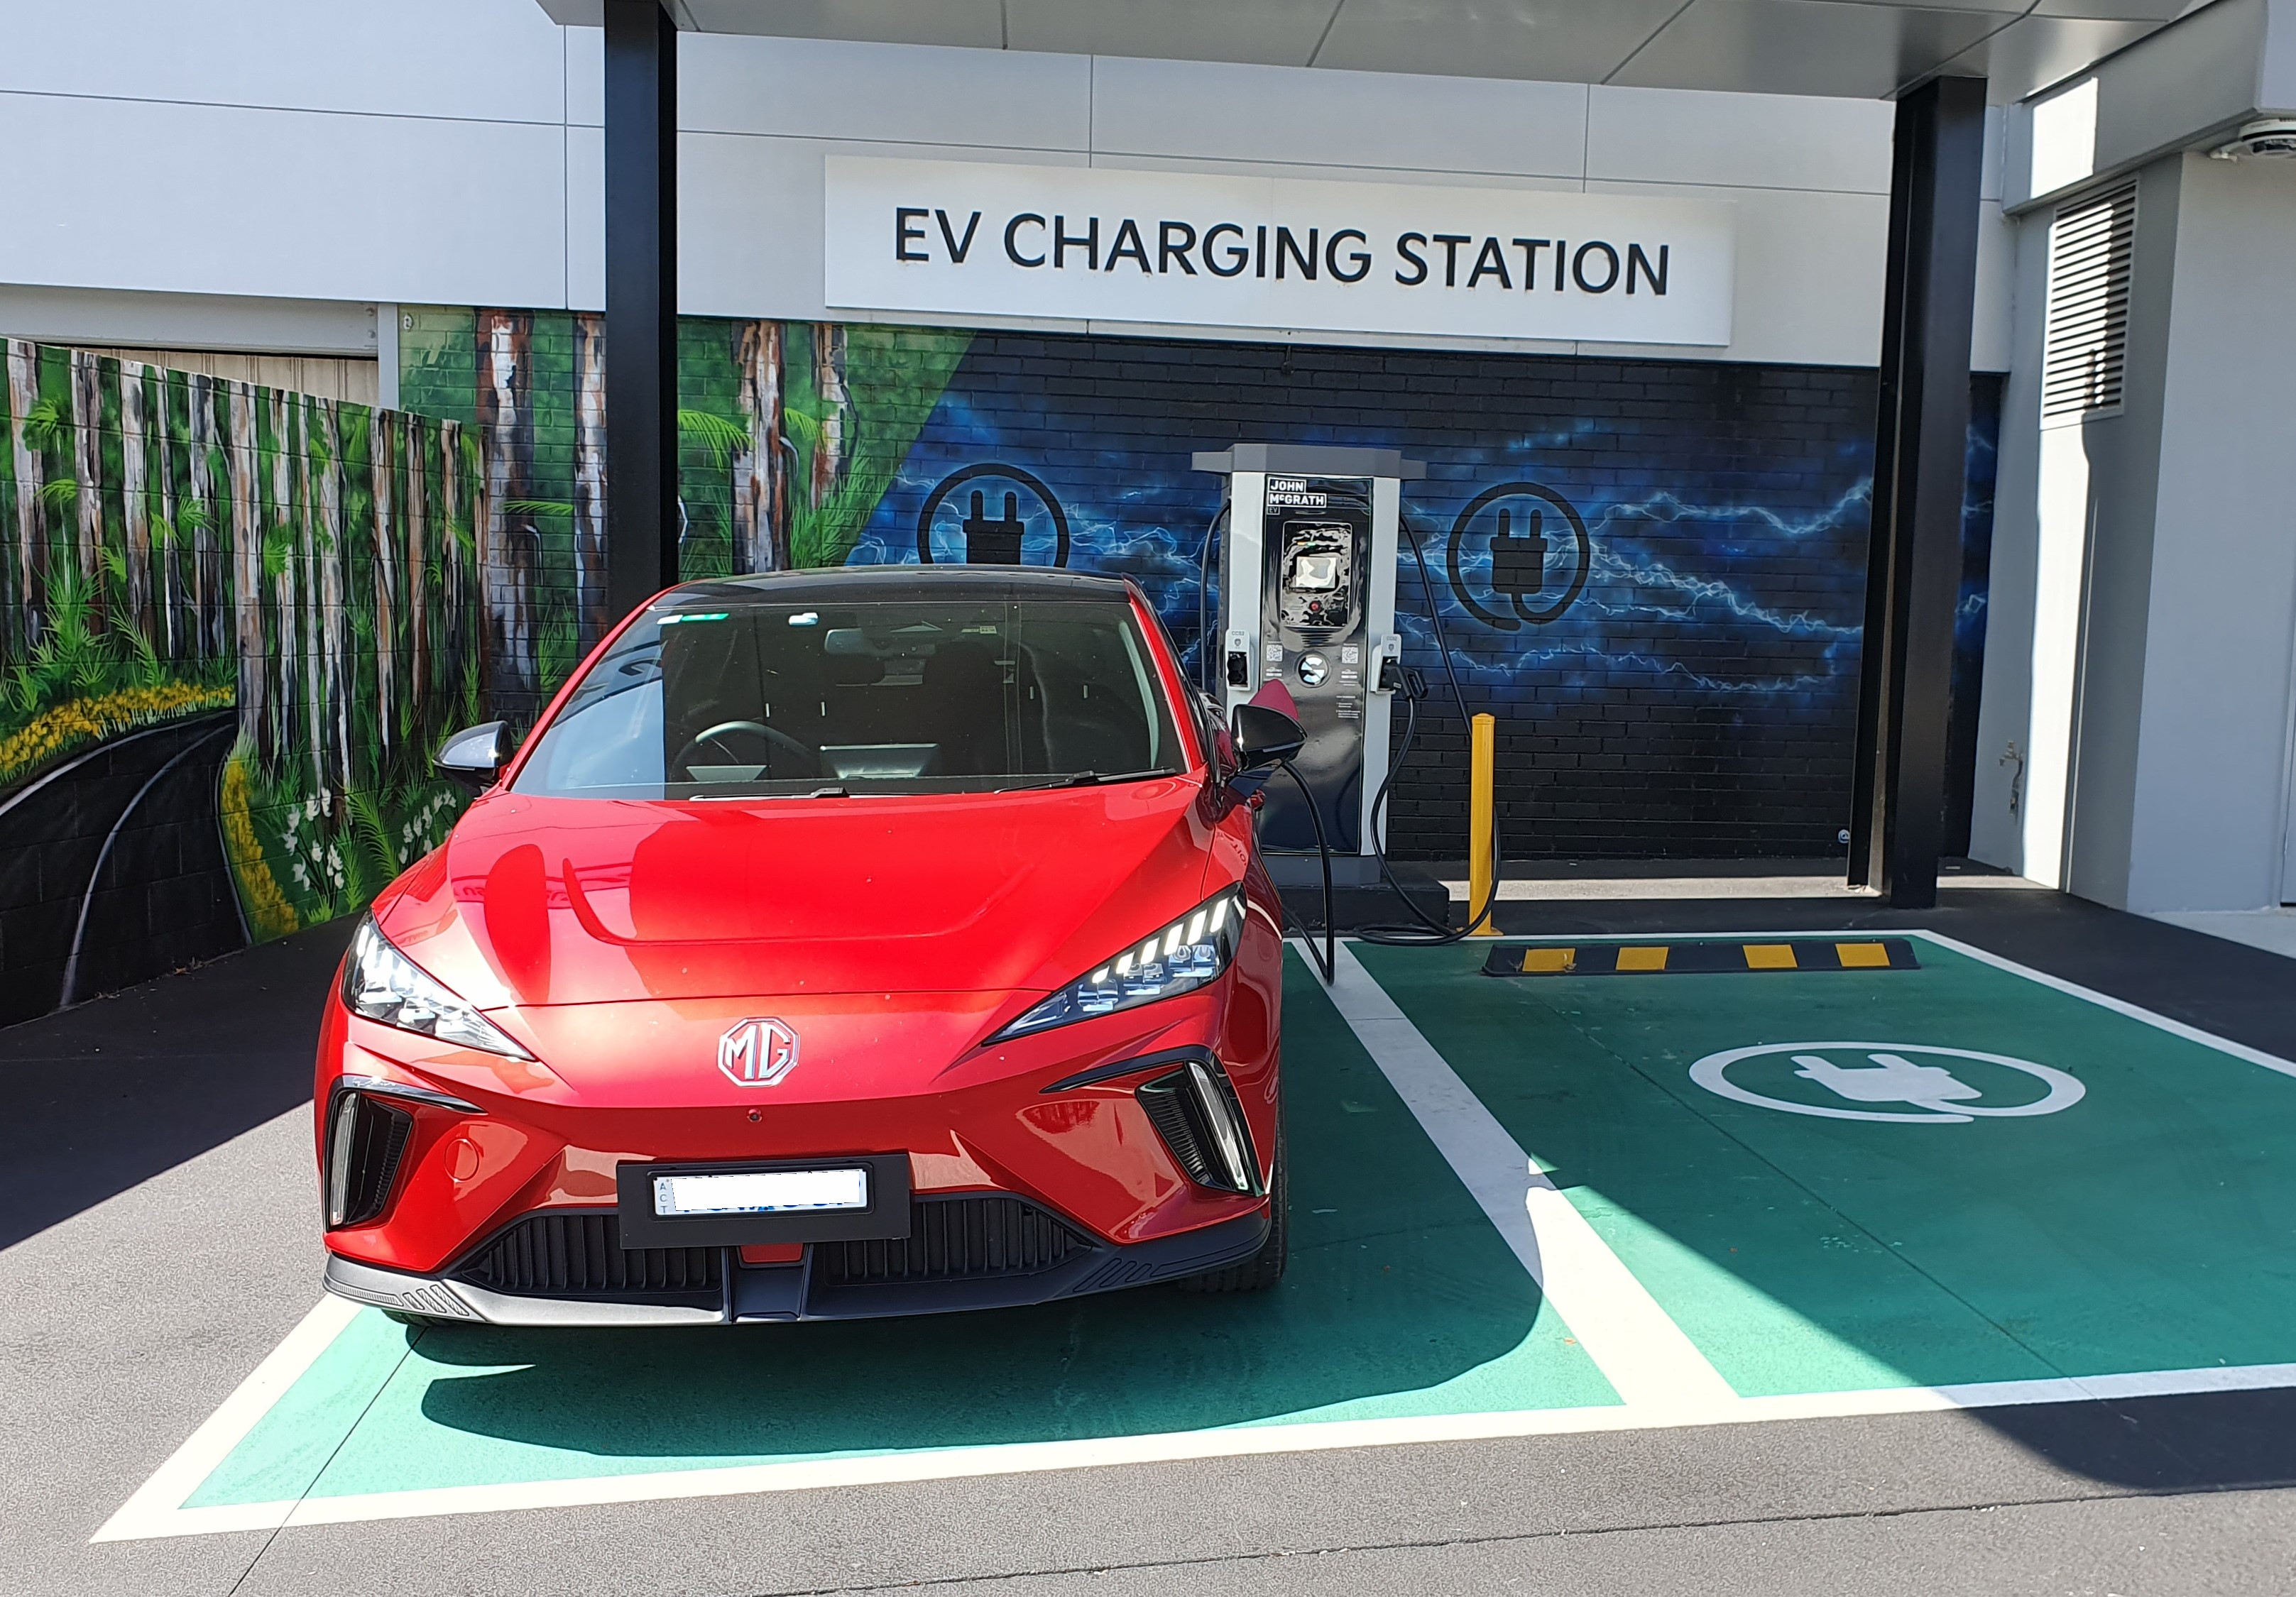 Over 8,000 EV registrations in the ACT